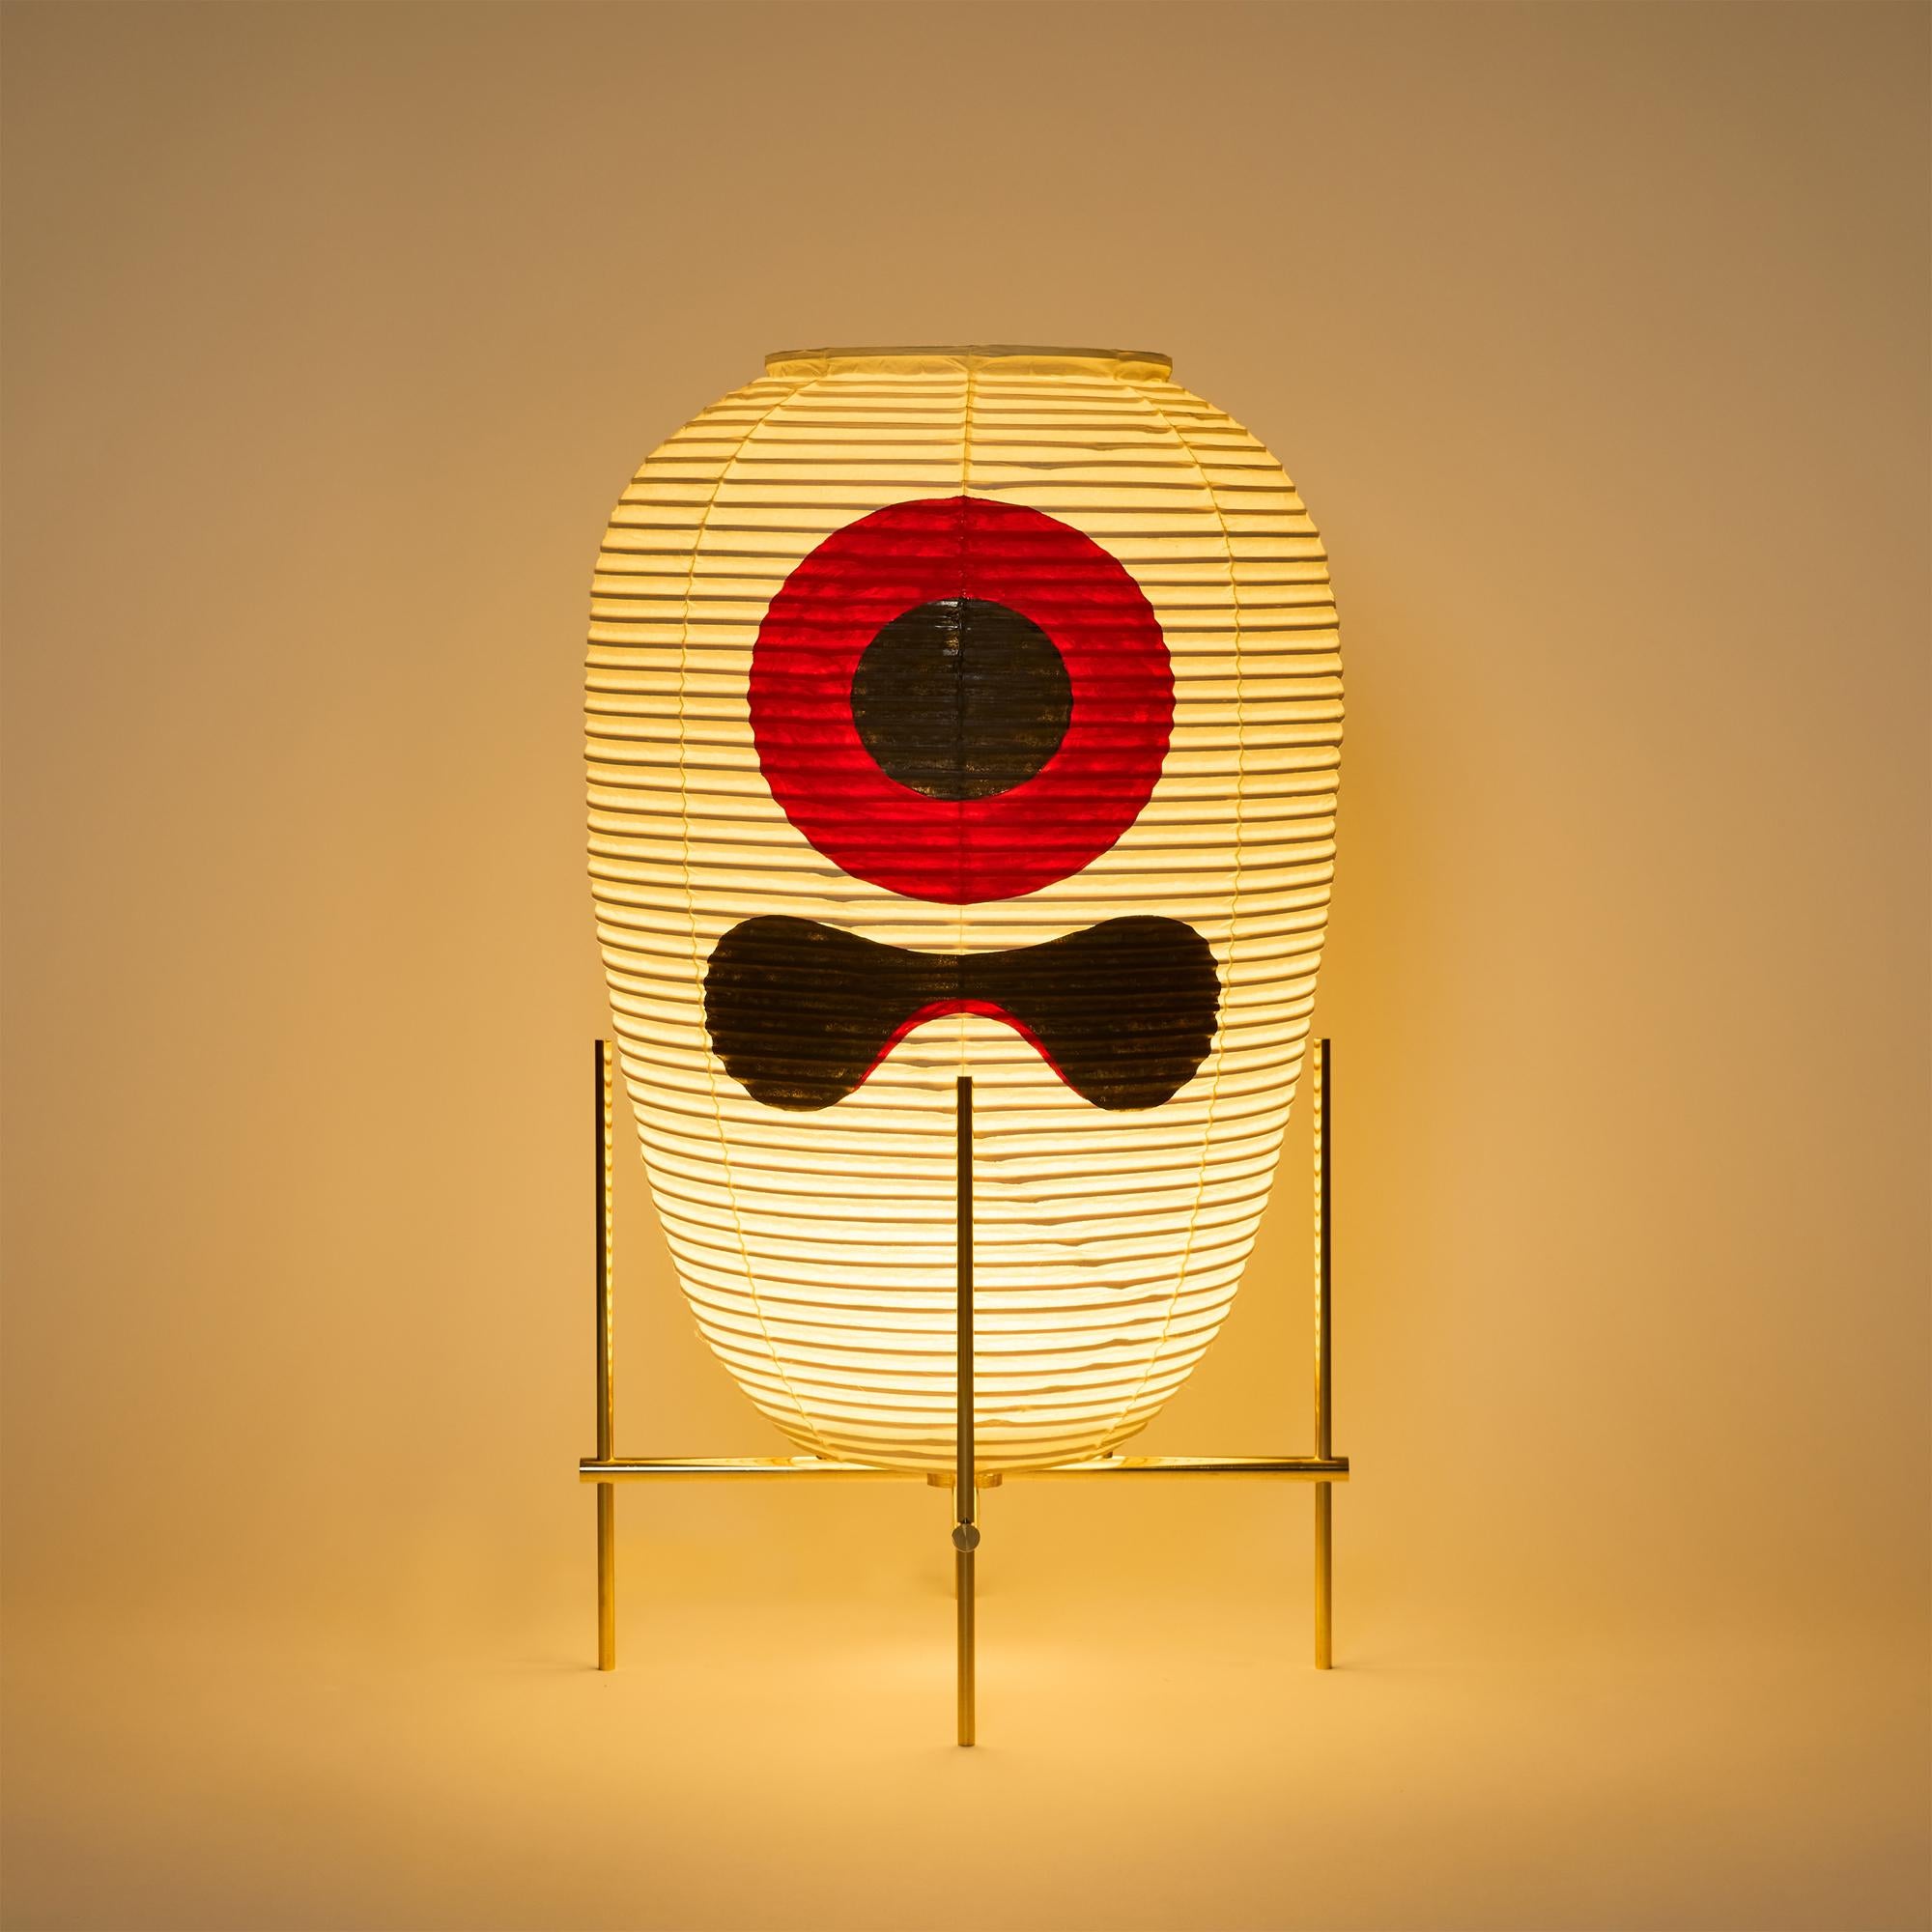 Name: OBAKE A
Contemporary style Japanese Washi Japanese traditional paper shade floor lamp. Washi shade is famous as Isamu Noguchi Akari lightings. 
Base is made of brass. Limited pattern painted model. Edition of 3+1AP

E26,27 light